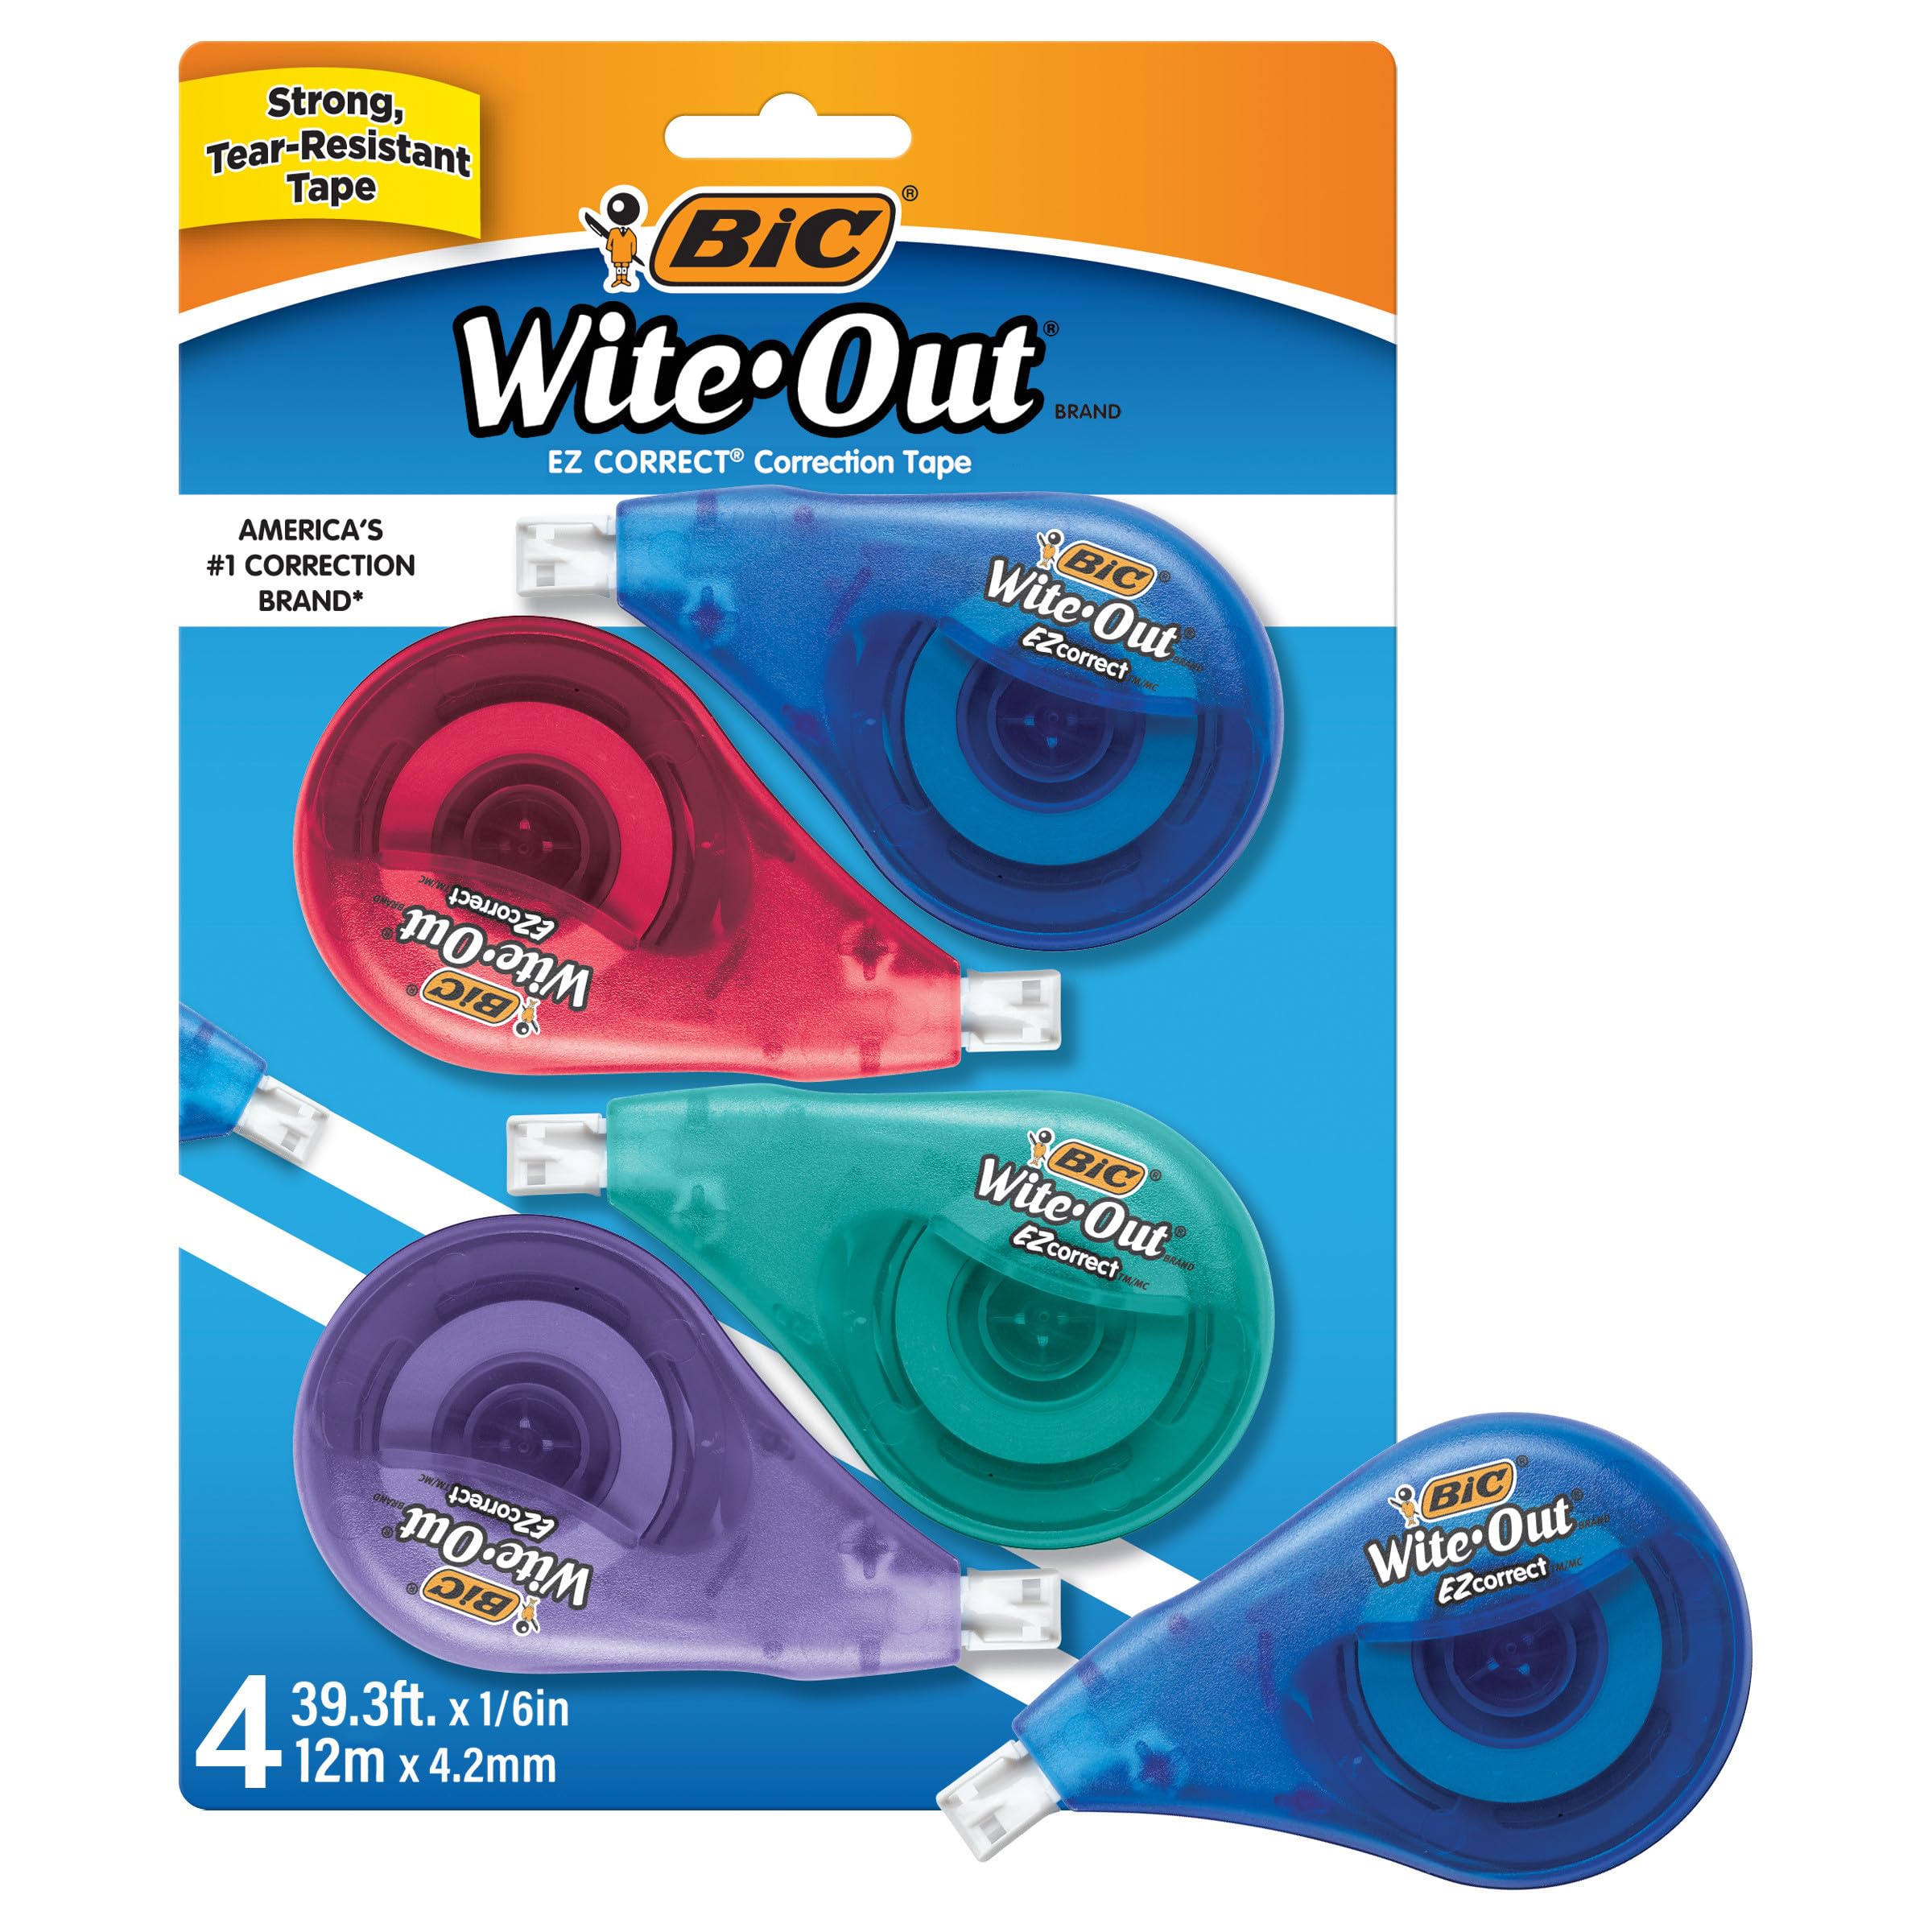 BIC White-Out Brand EZ Correct Correction Tape, 39.3 Feet, 4-Count Pack of white Correction Tape, Fast, Clean and Easy to Use $3.99 + Free Shipping w/ Prime or on $35+